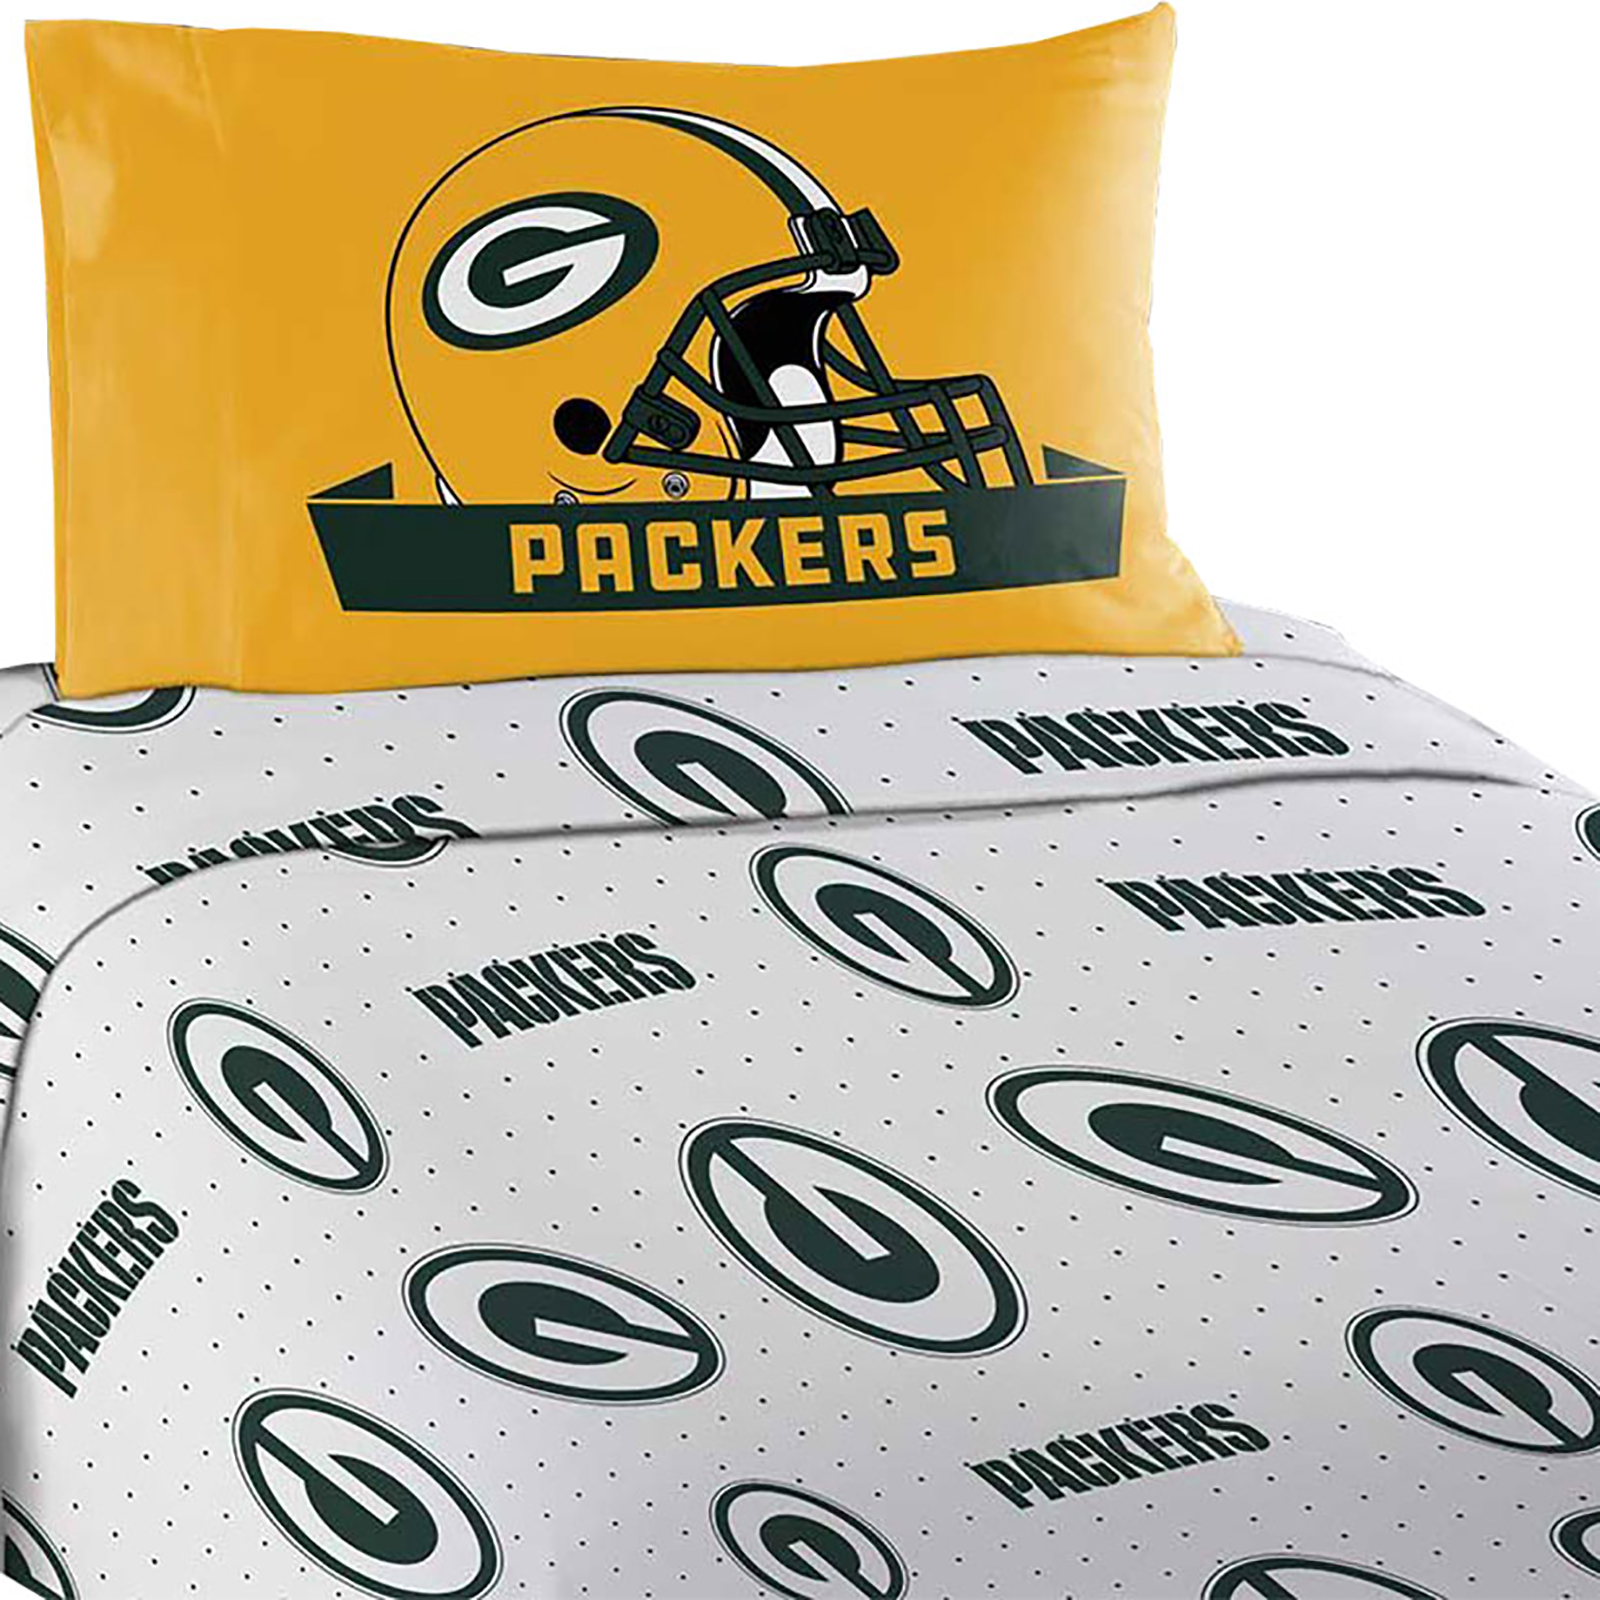 Northwest Green Bay Packers Monument, Green Bay Packers Twin Bed Sheets